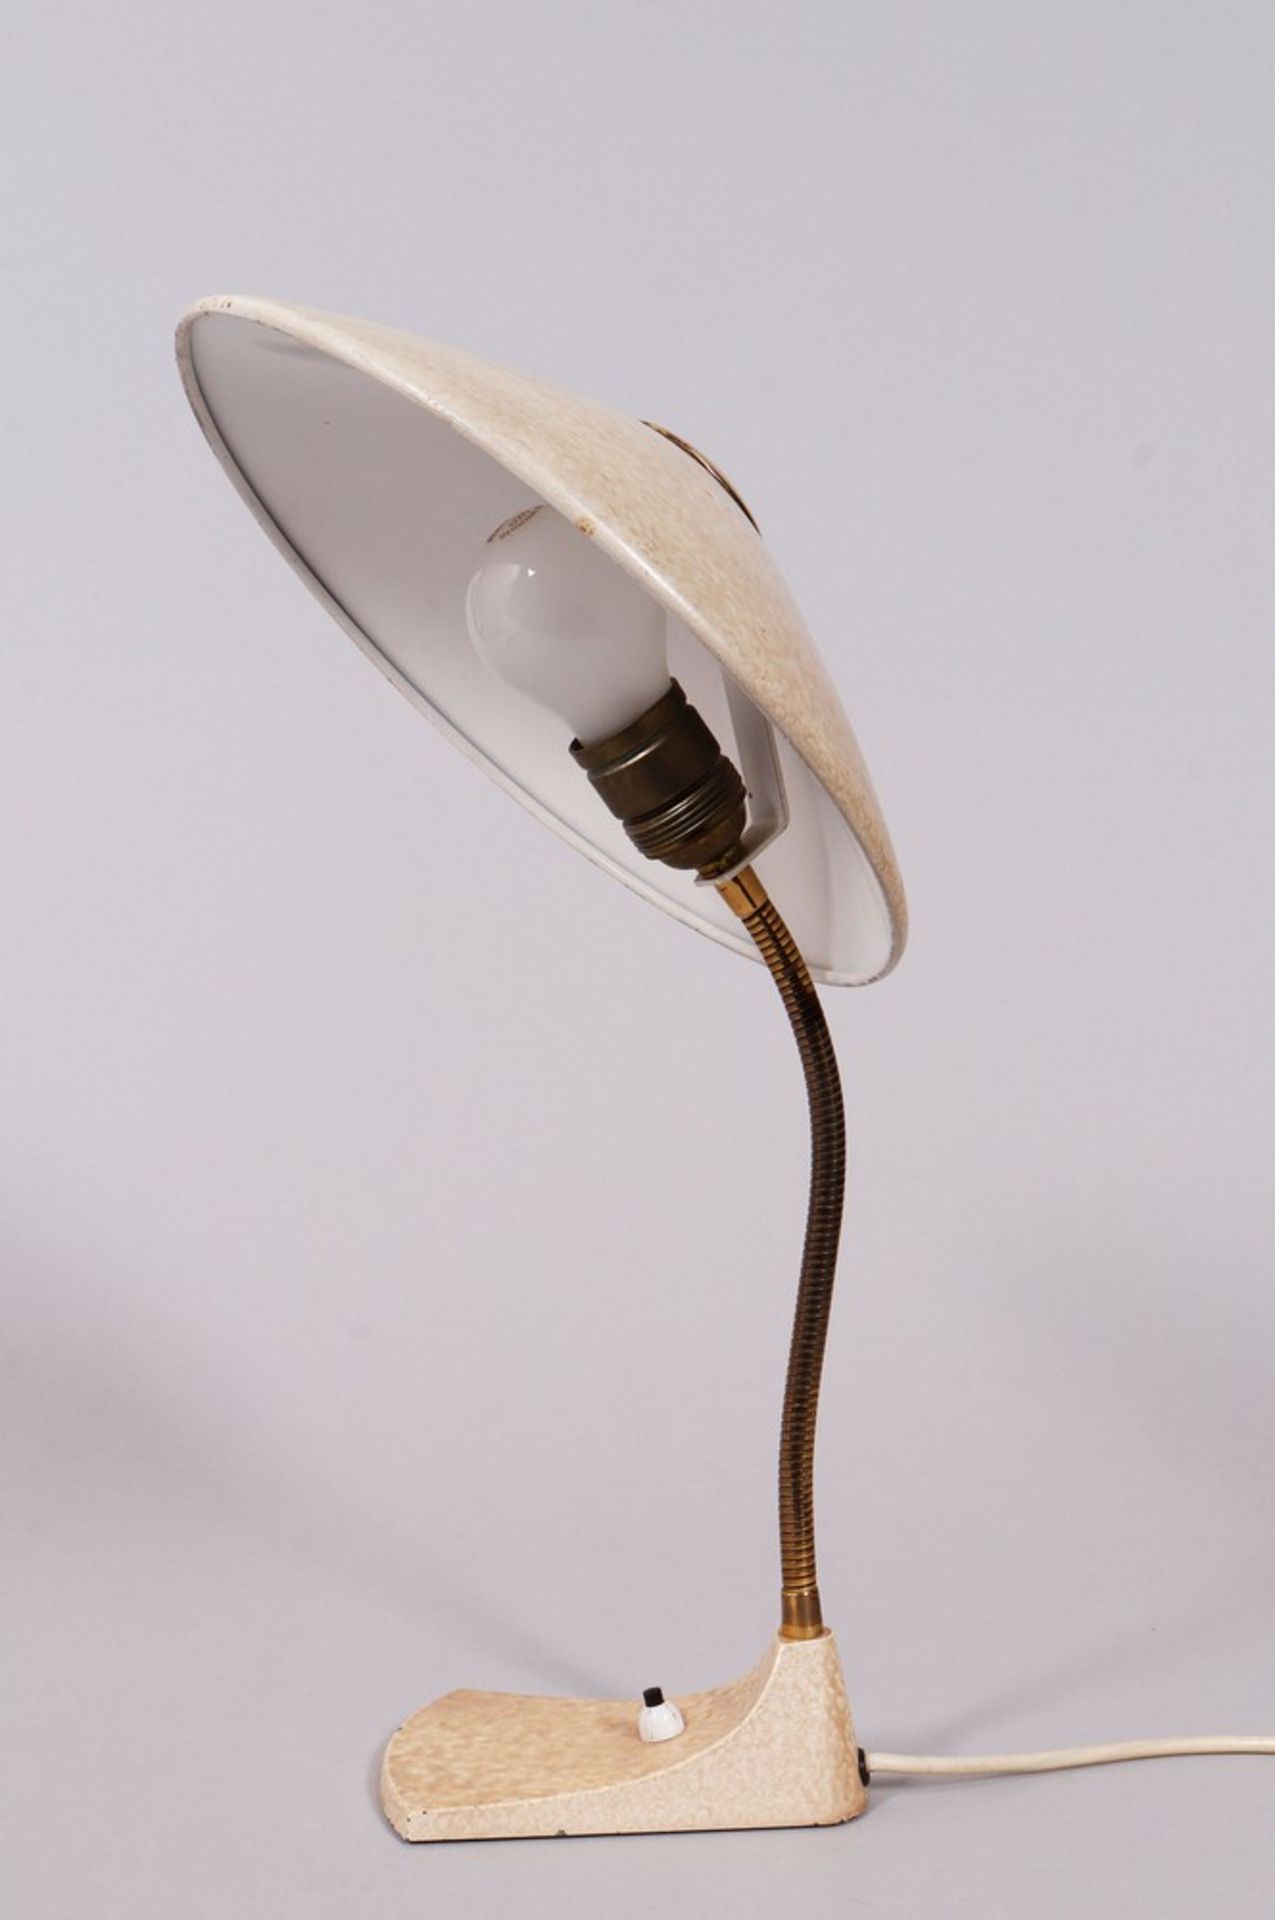 Desk lamp, probably Philips, 1950s - Image 2 of 3